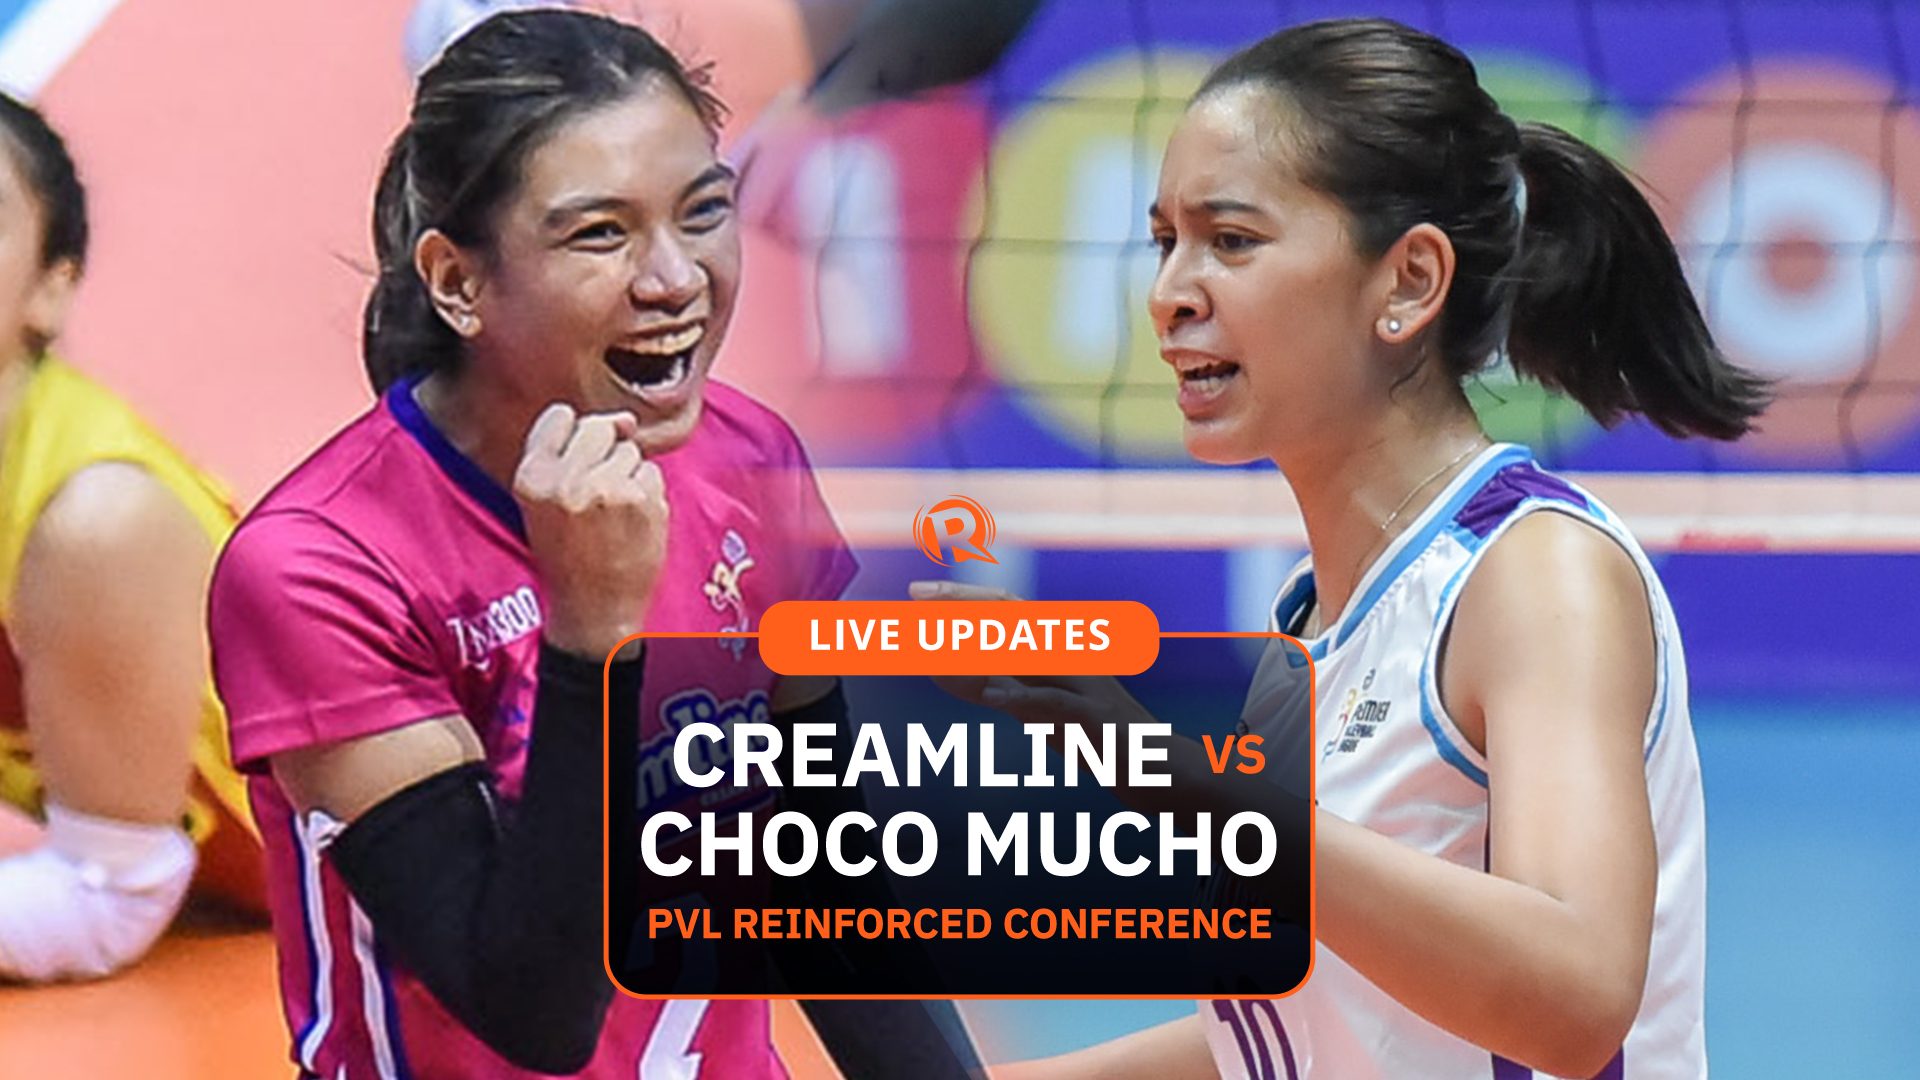 HIGHLIGHTS: PVL Reinforced Conference – Creamline vs Choco Mucho